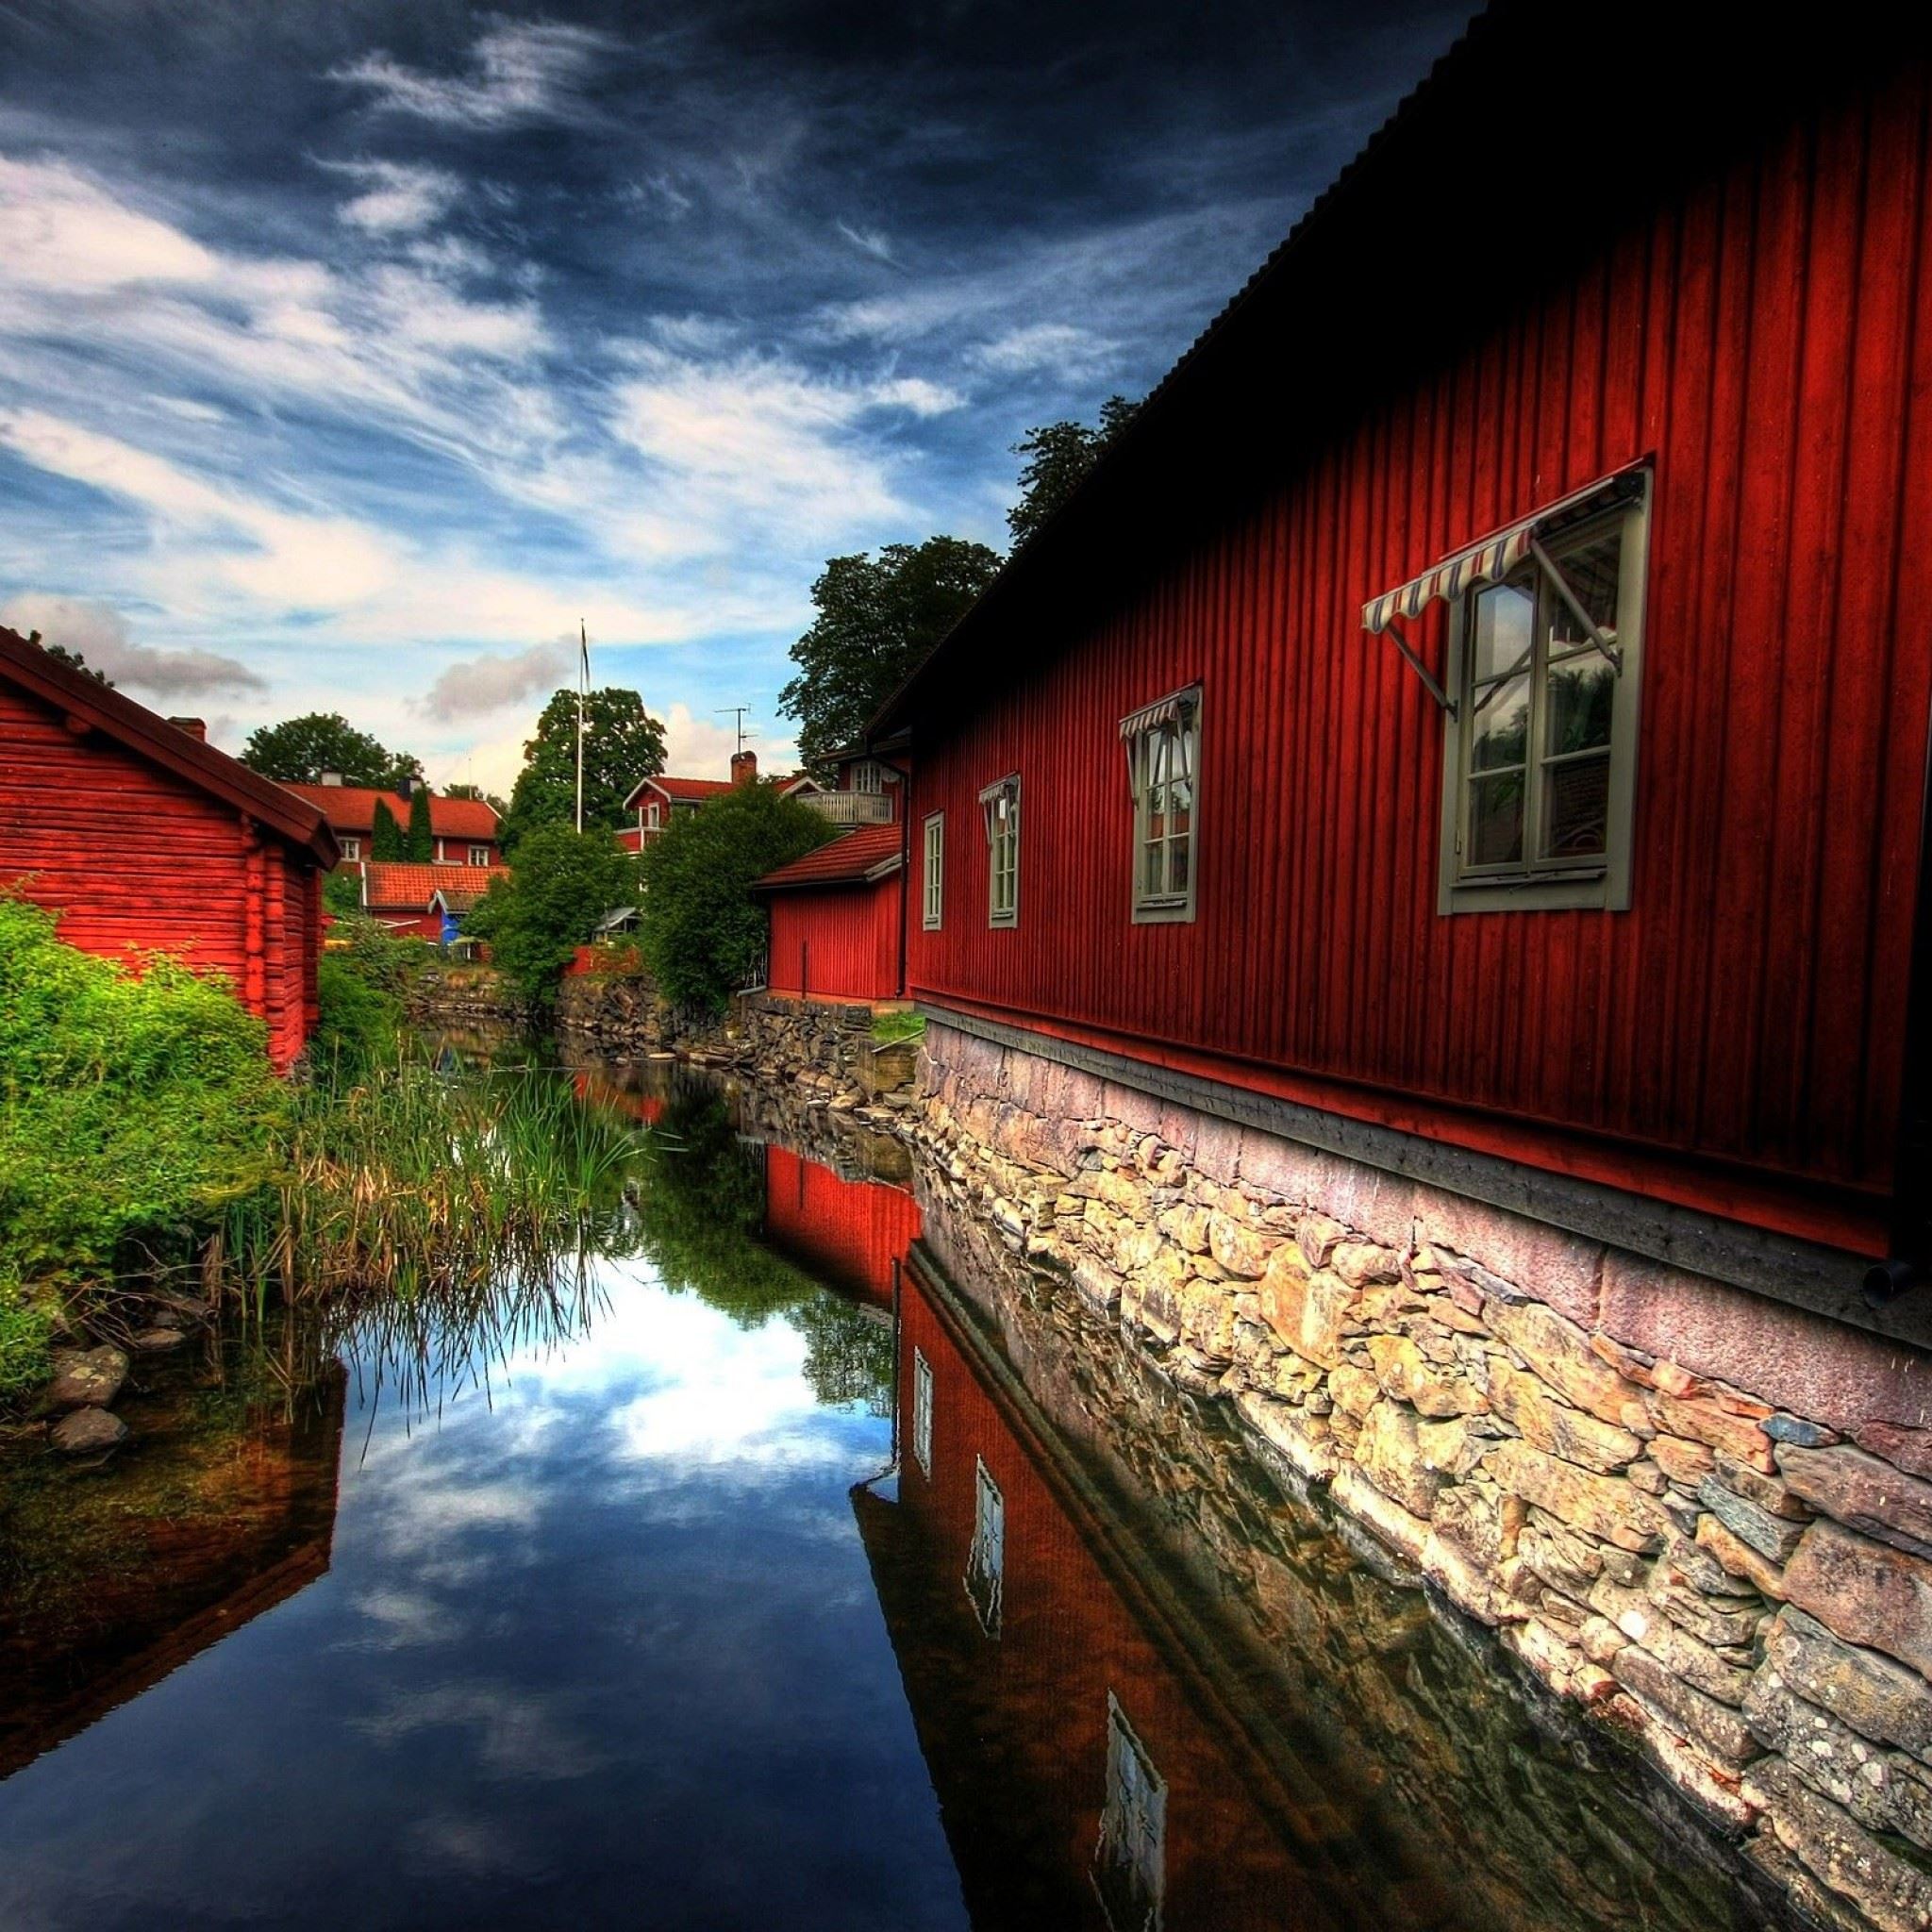 Nature River house iPad Air Wallpapers Free Download